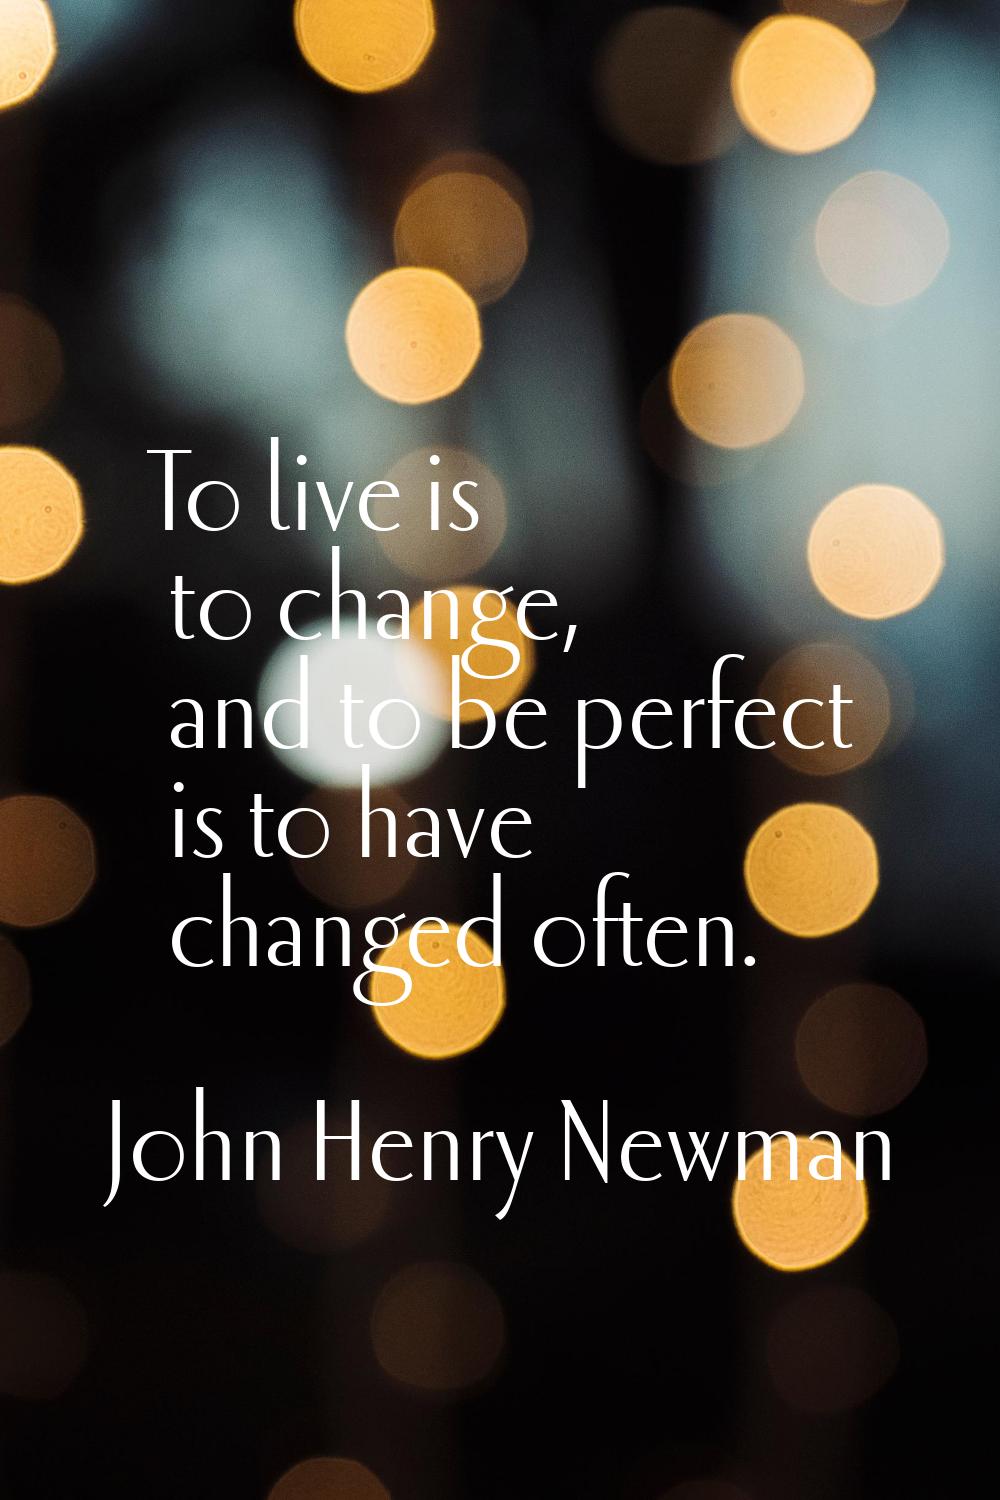 To live is to change, and to be perfect is to have changed often.